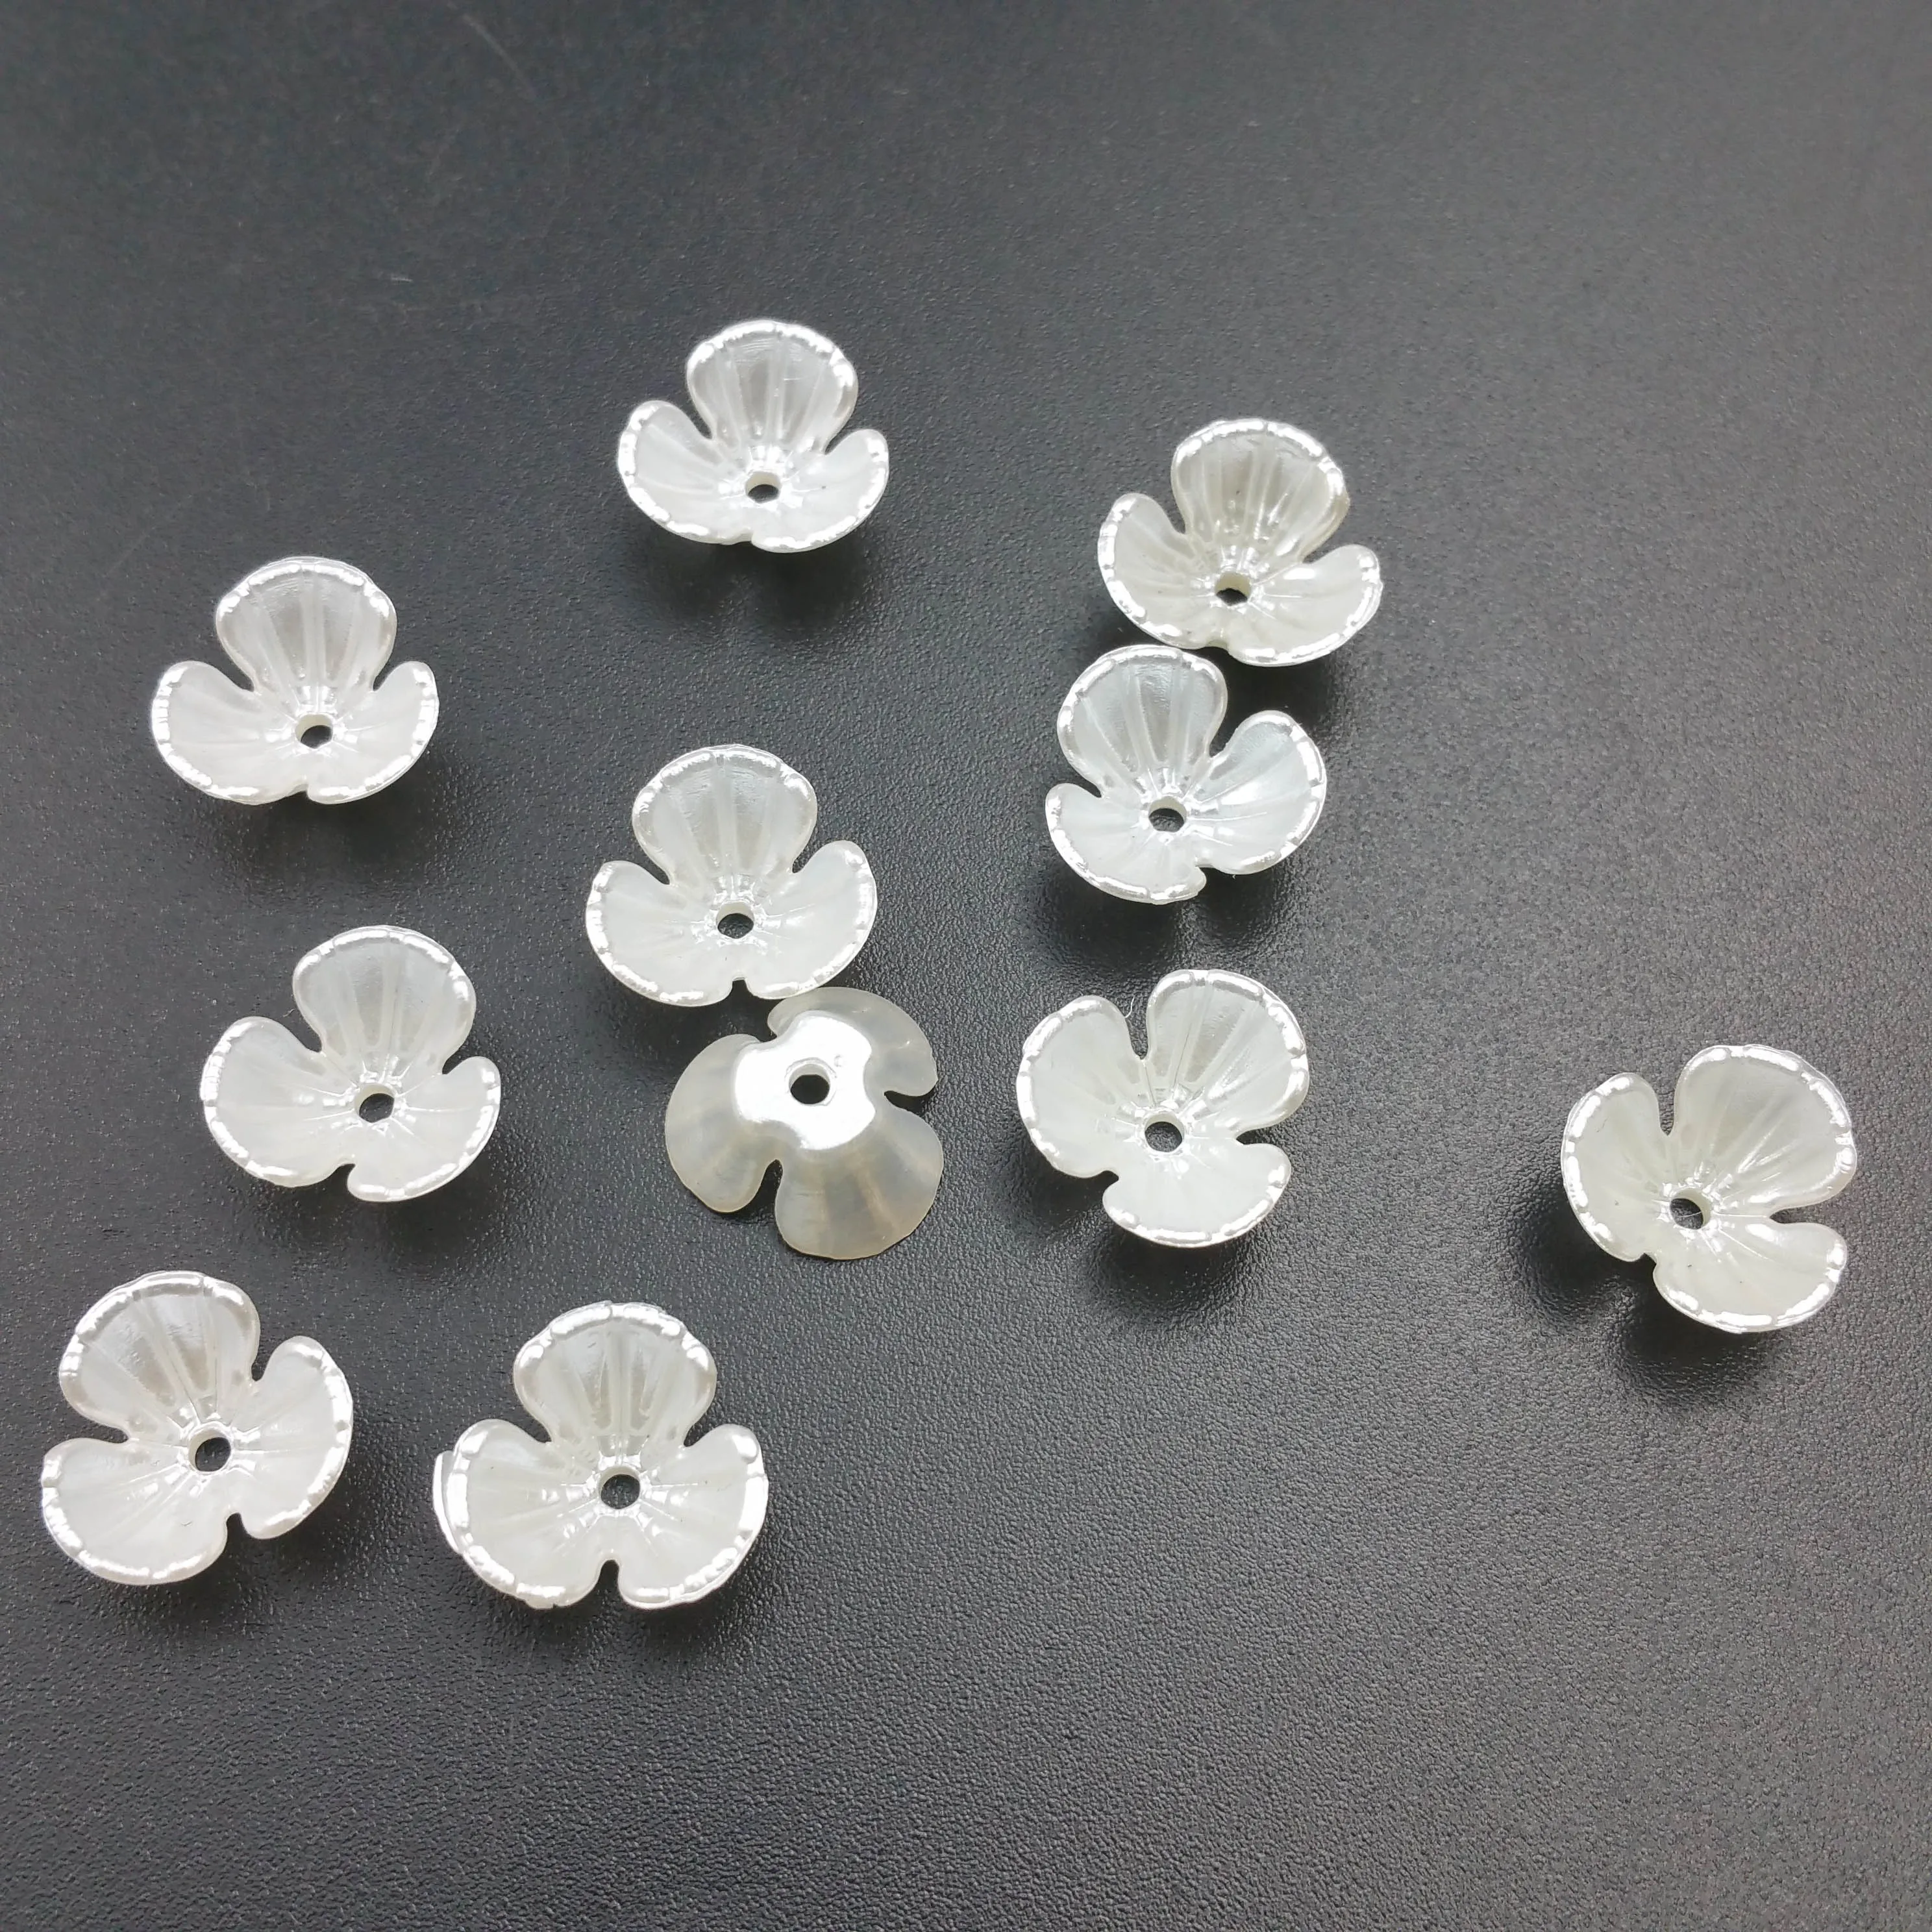 

50pcs/Lot 10mm Trefoil Flower Loose Spacer Bead Caps Cone End Beads Cap Filigree For DIY Jewelry Finding Making